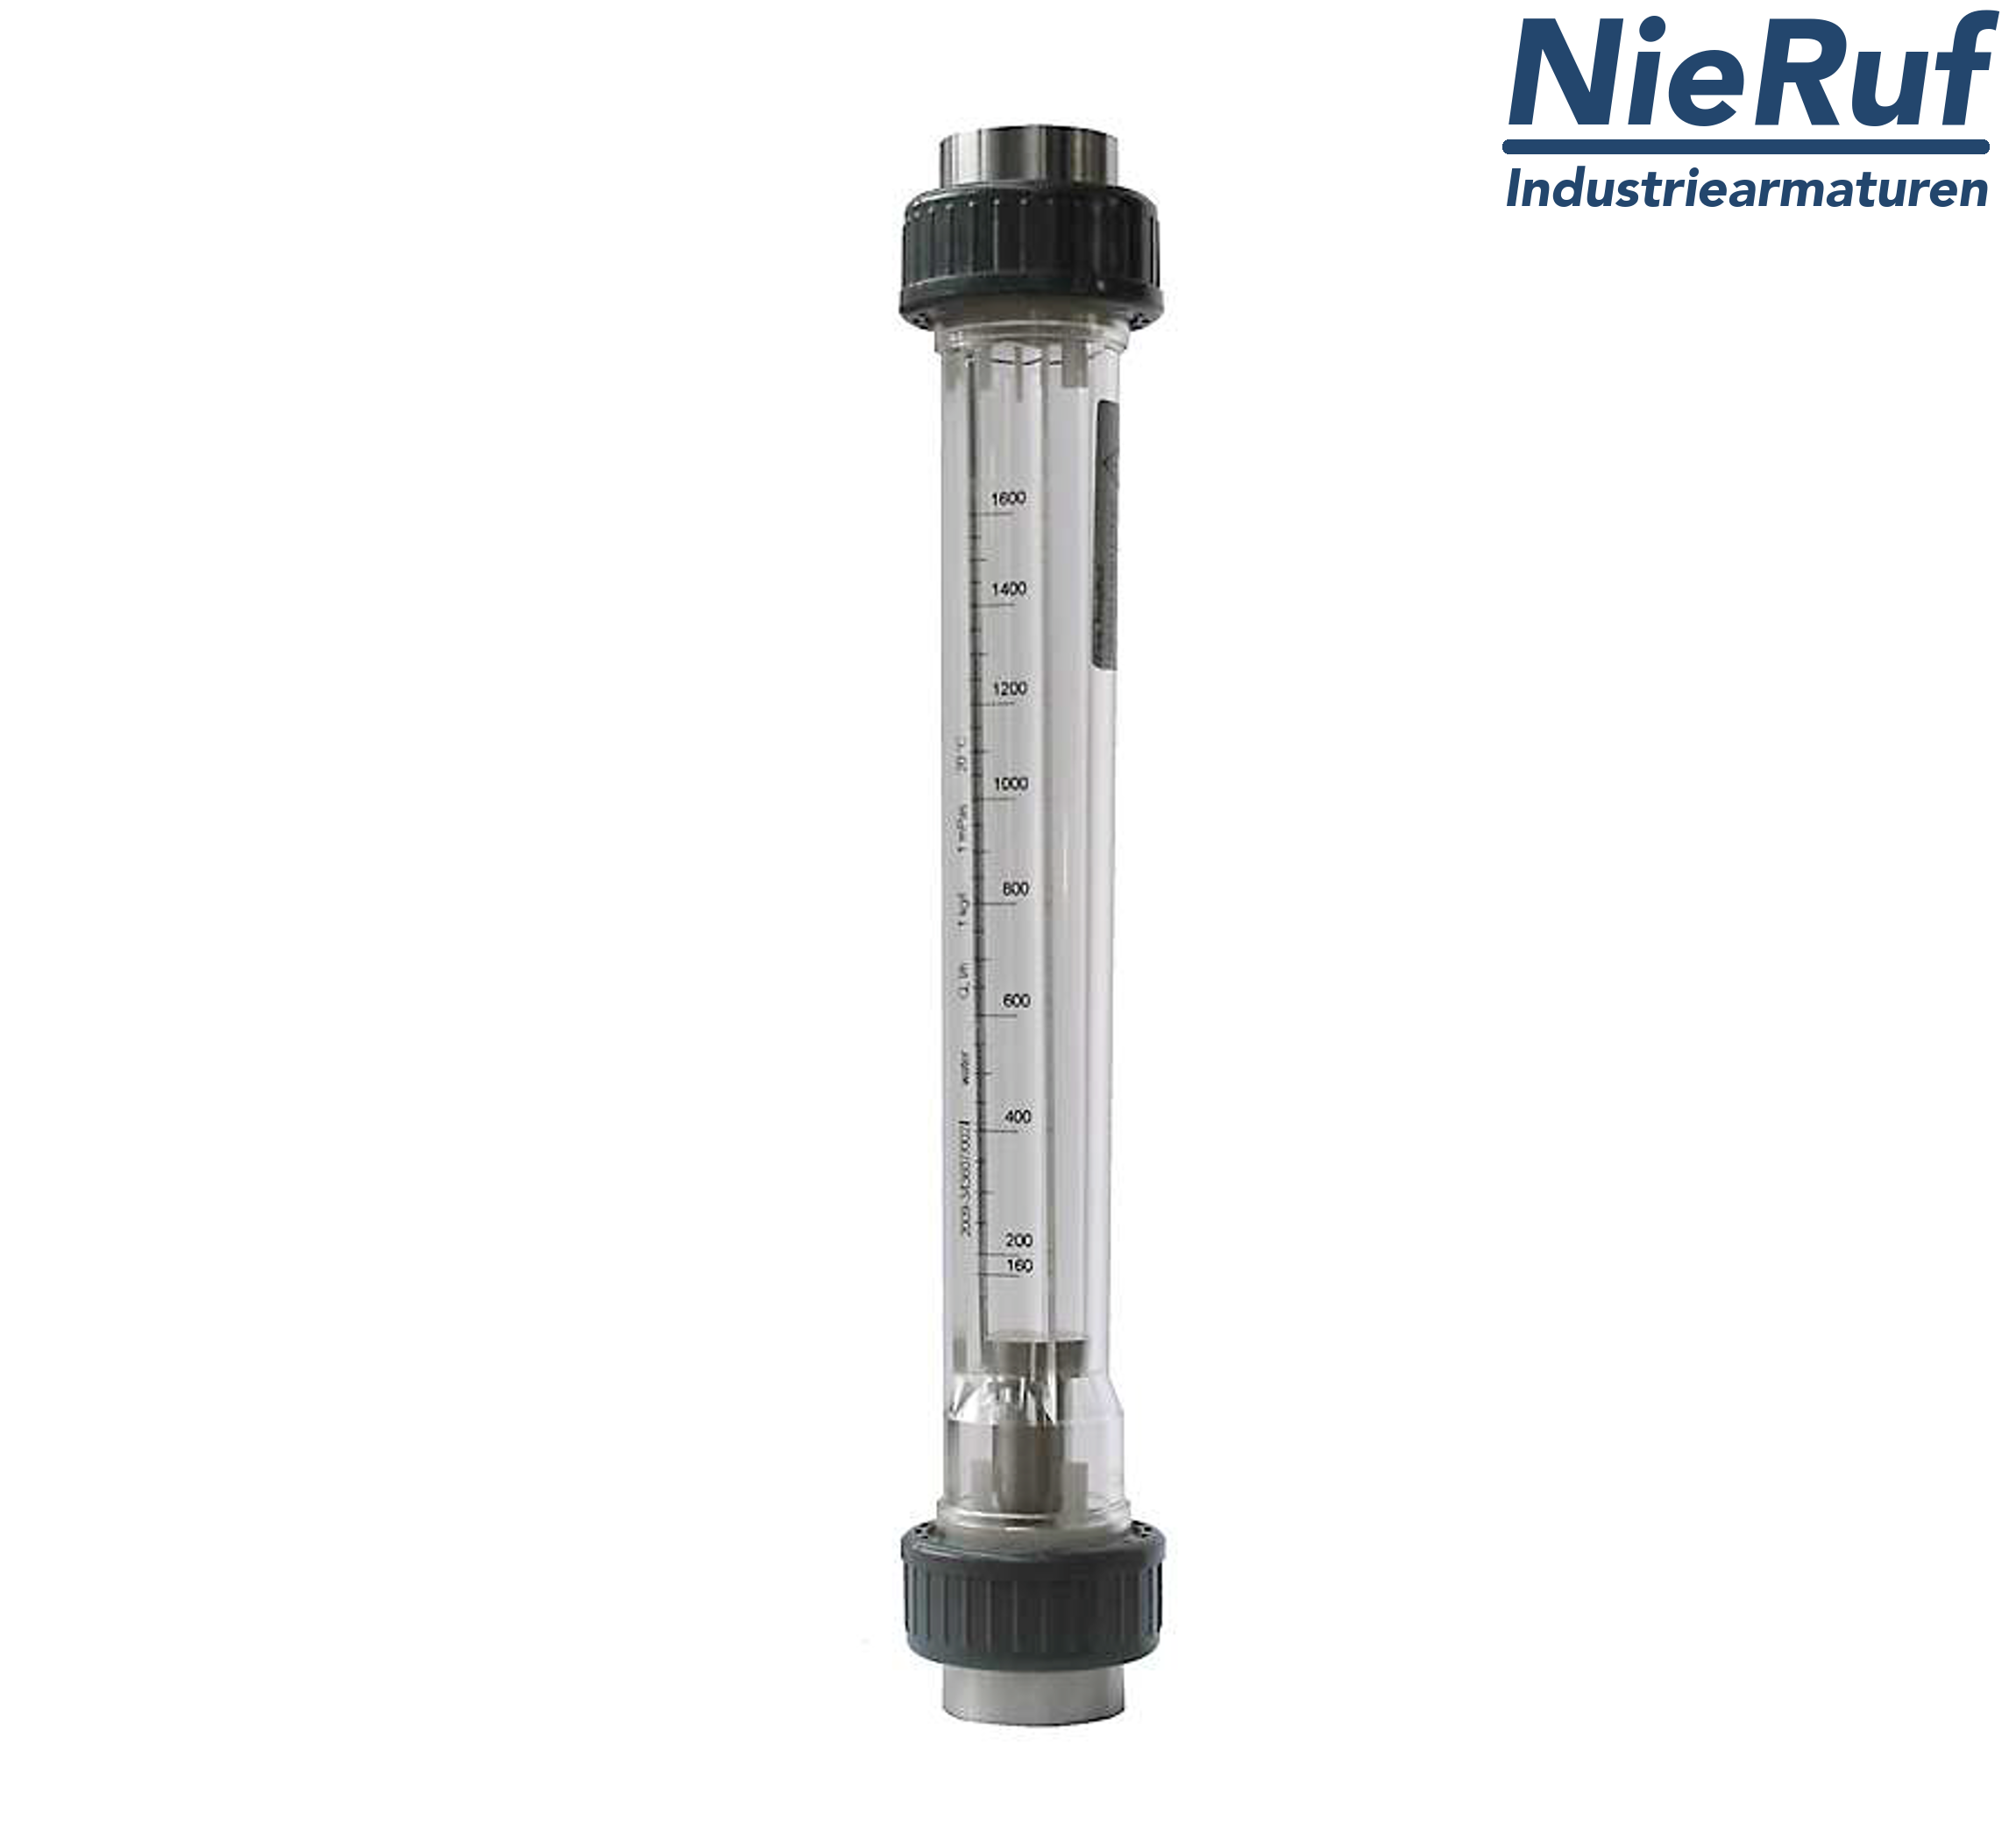 Variable area flowmeter 2" inch 6700.0 - 20000 l/h water FKM